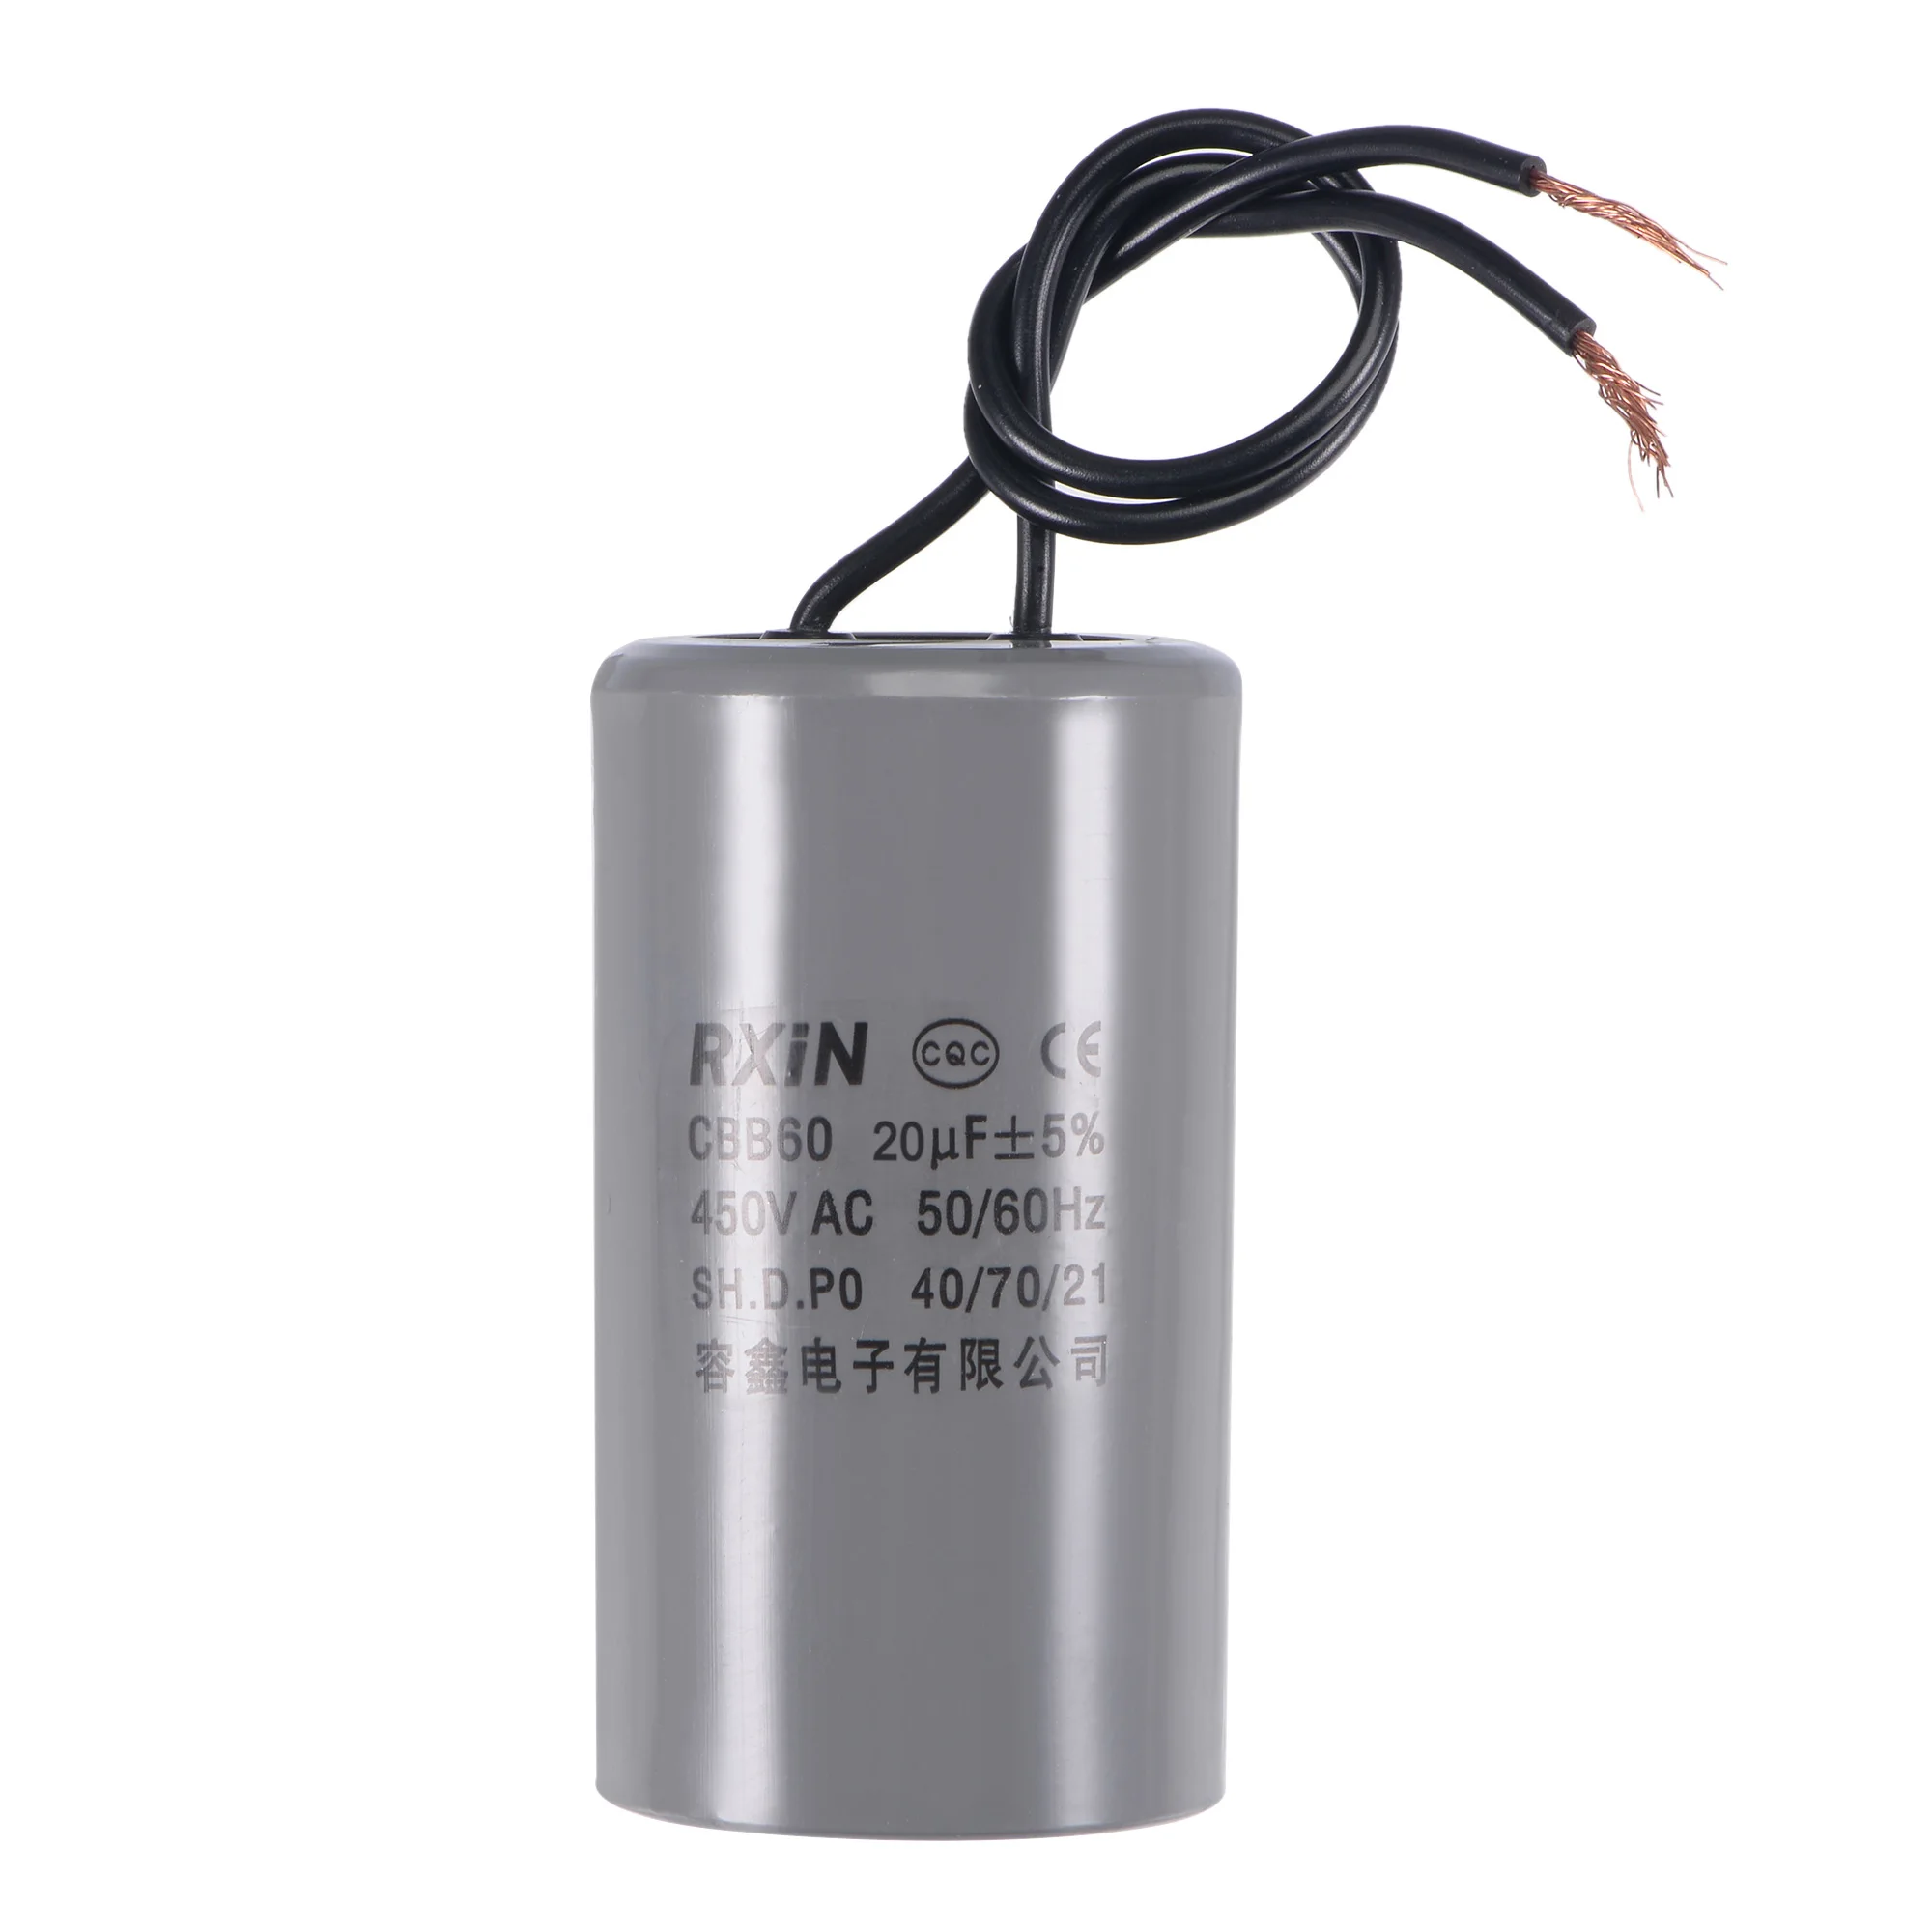 

Uxcell CBB60 Run Capacitor 20uF 450V AC 2 Wires 75x42mm for Compressor Pump Motor